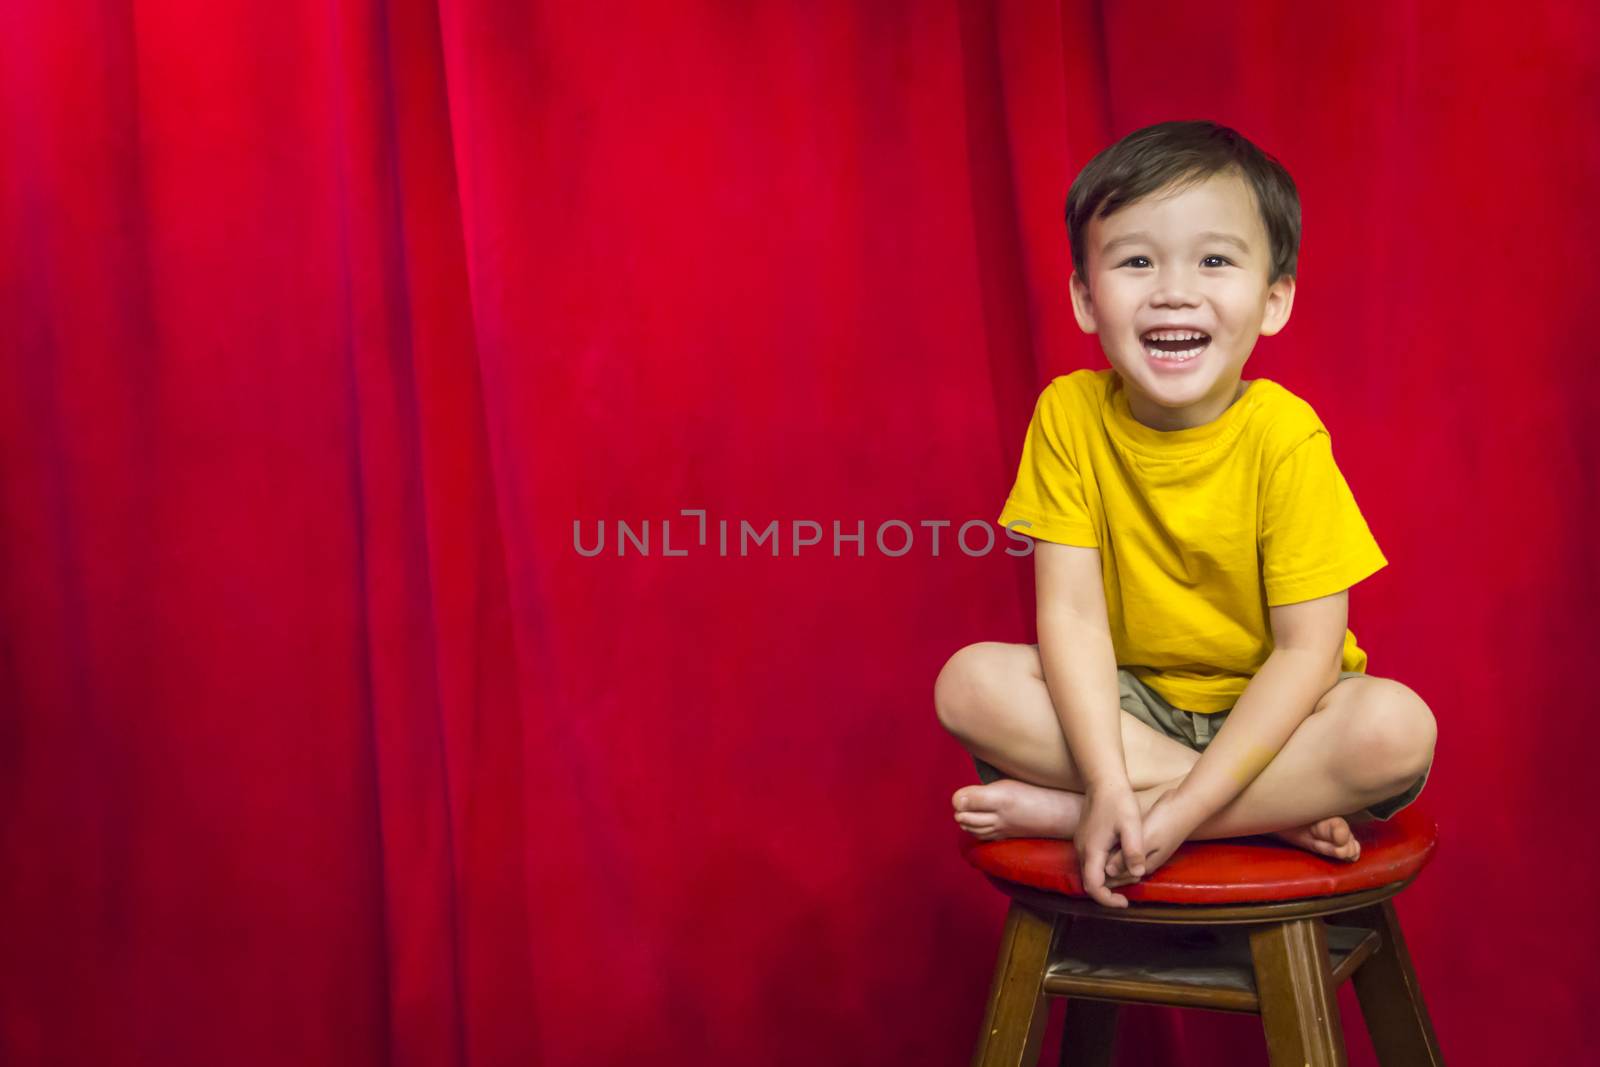 Laughing Mixed Race Boy Sitting on Stool in Front of Red Curtain.